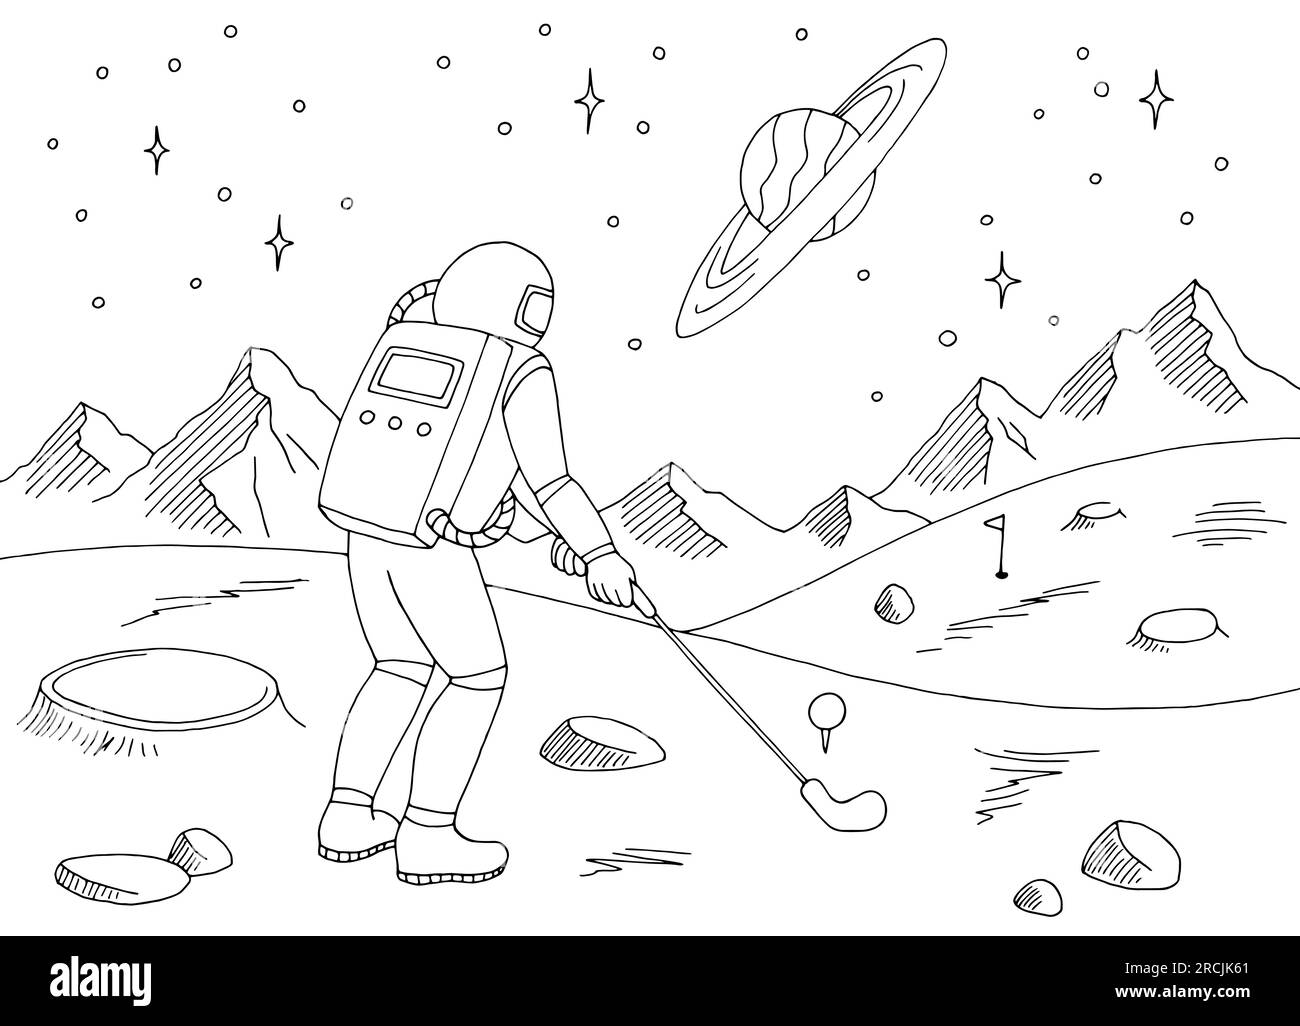 Astronaut play golf on alien planet graphic black white space landscape sketch illustration vector Stock Vector